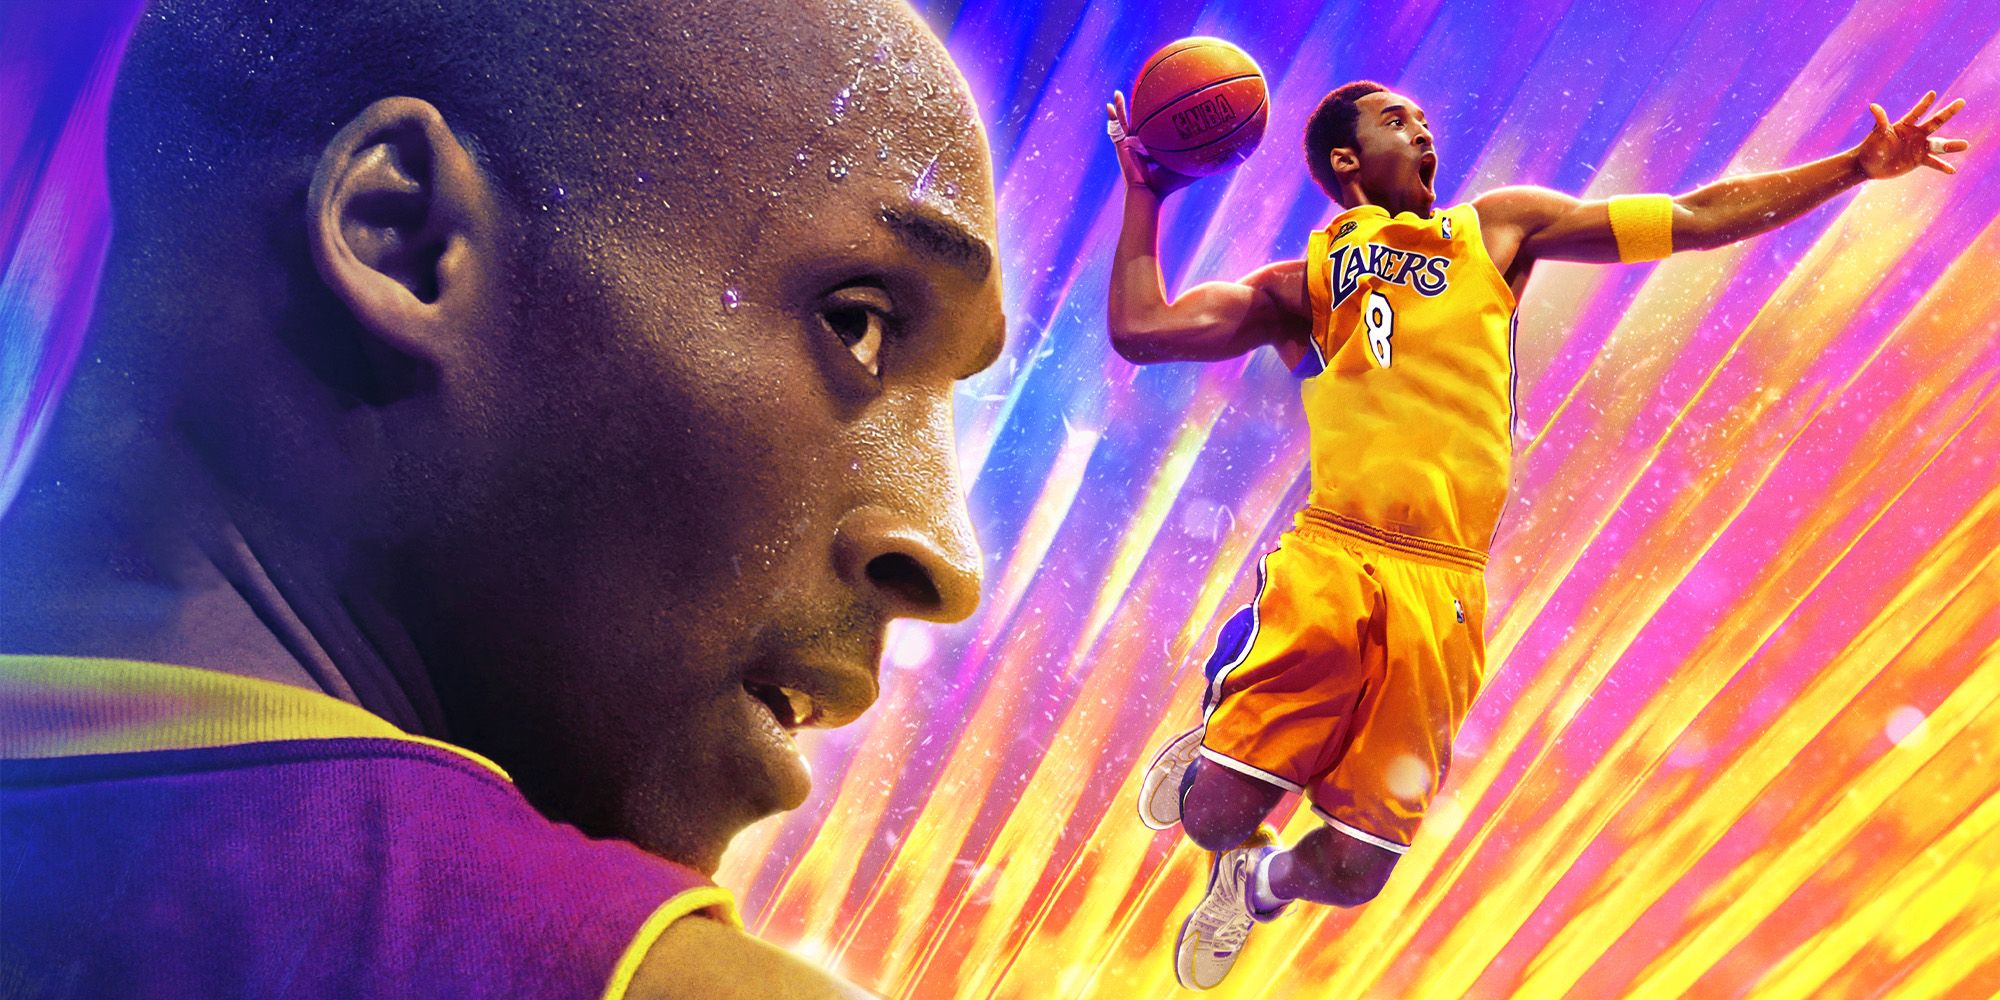 Images of Kobe Bryant on the covers of NBA 2K24 and its Black Mamba Edition - one of him looking over his shoulder, and the other showing him in midair during a one-armed dunk.